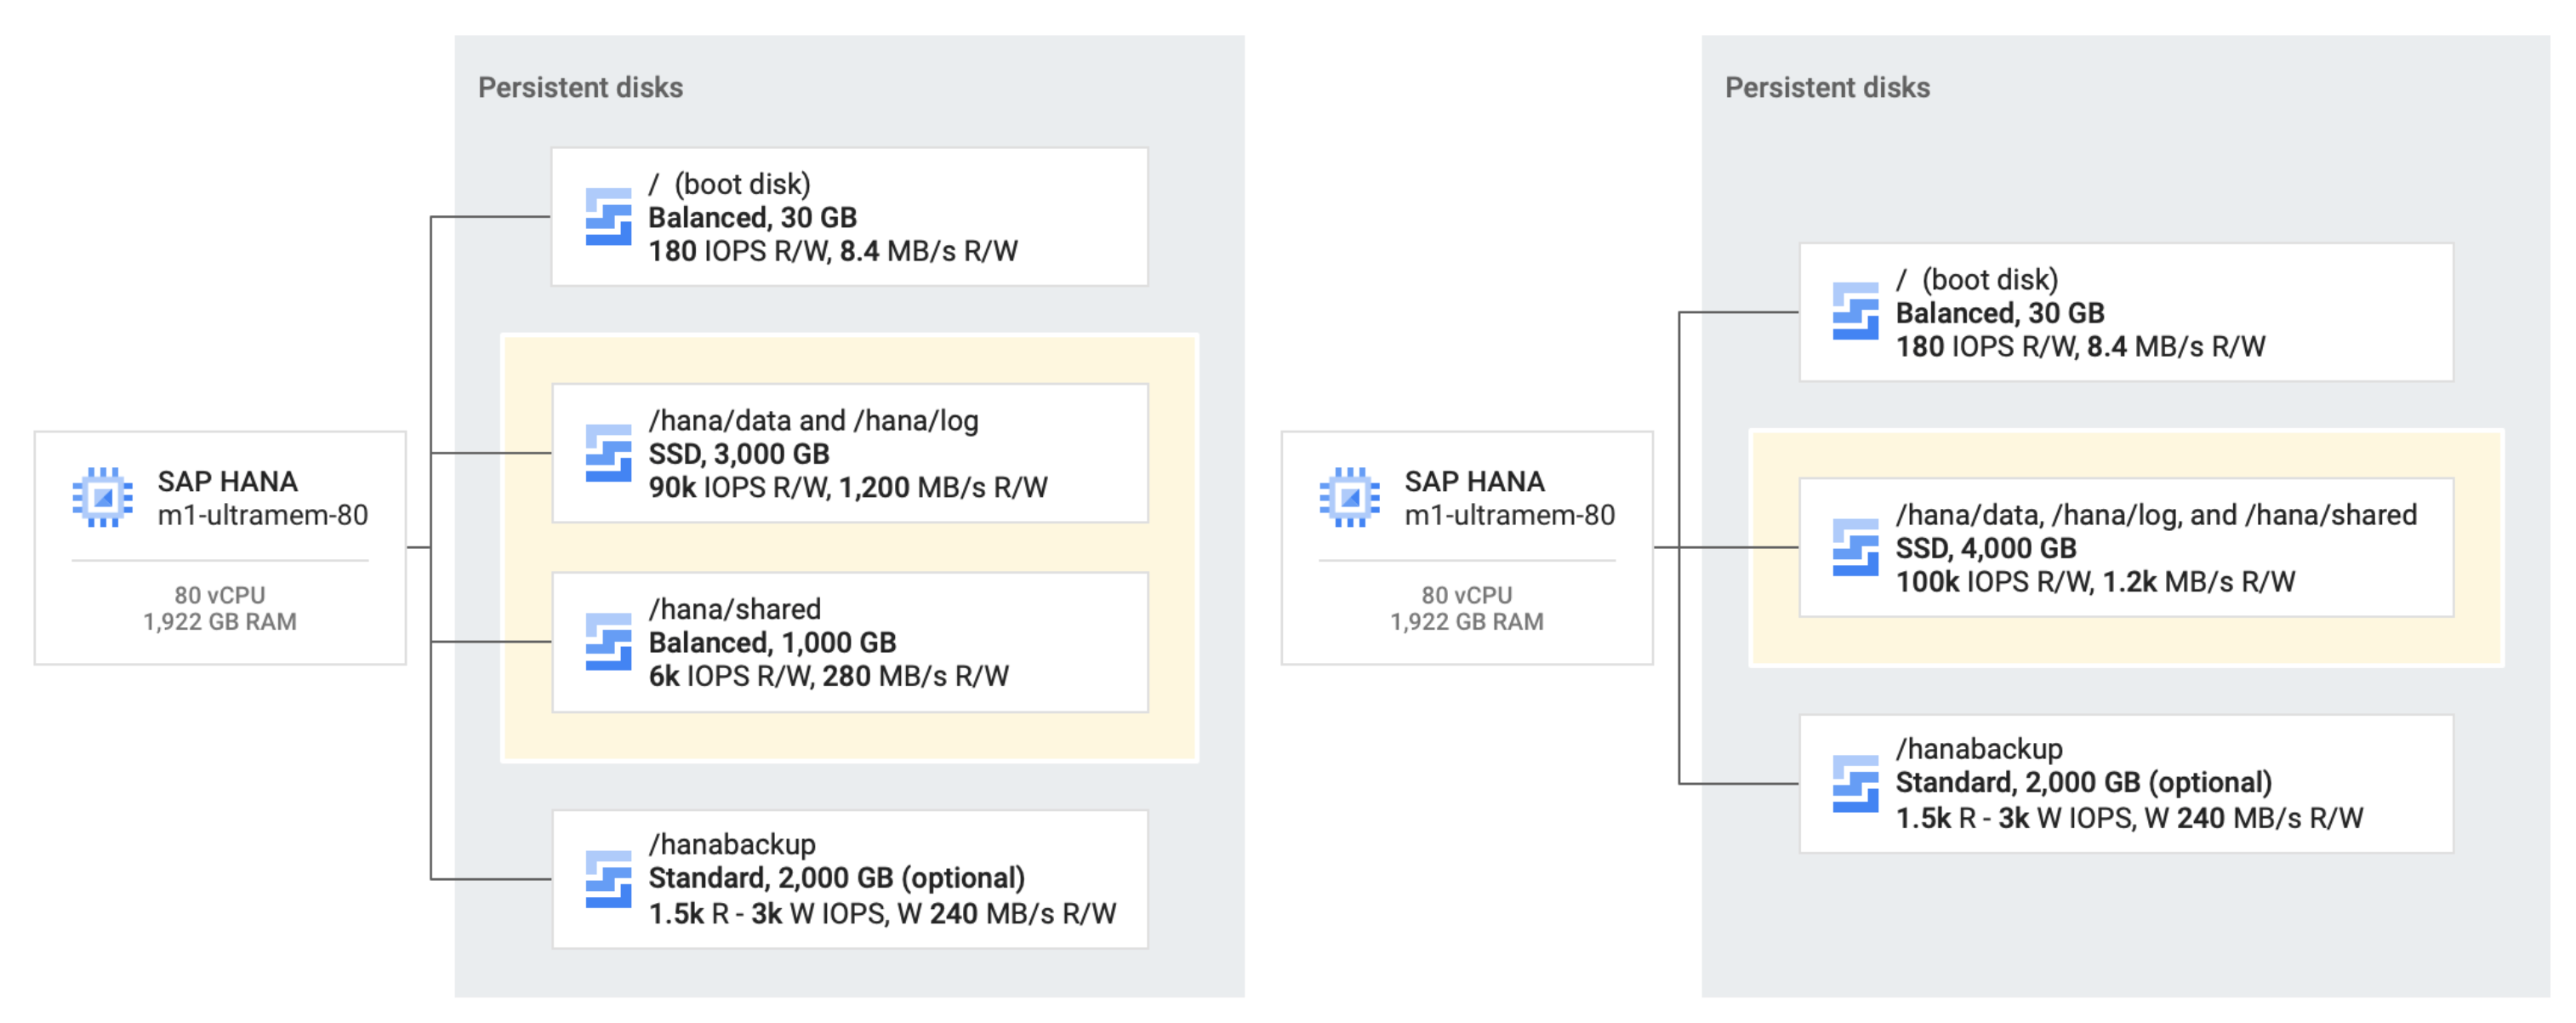 Two SAP HANA systems are shown: the left one has `/hana/shared` on its own
balanced persistent disk and `/hana/data` and `/hana/log` on together on an SSD
persistent disk. The other system has `/hana/data`, `/hana/log`, and
`/hana/shared` together on a single SSD persistent disk, which is the
recommended architecture.